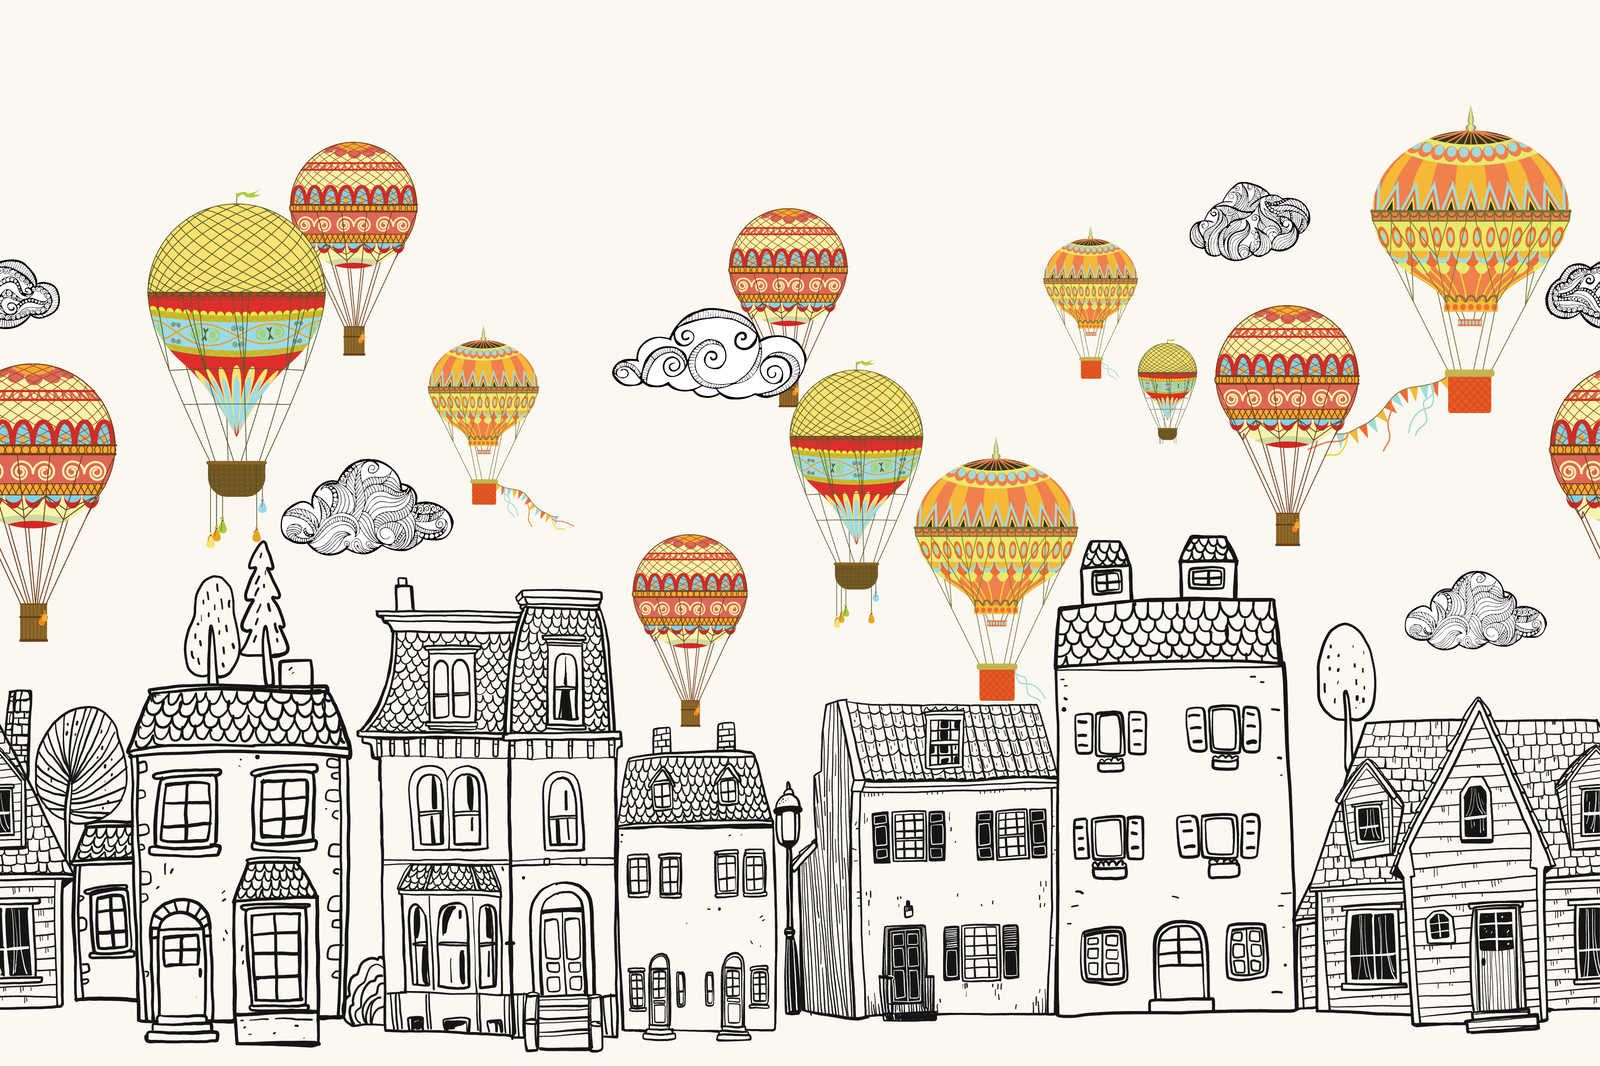             Canvas Small Town with Hot Air Balloons - 90 cm x 60 cm
        